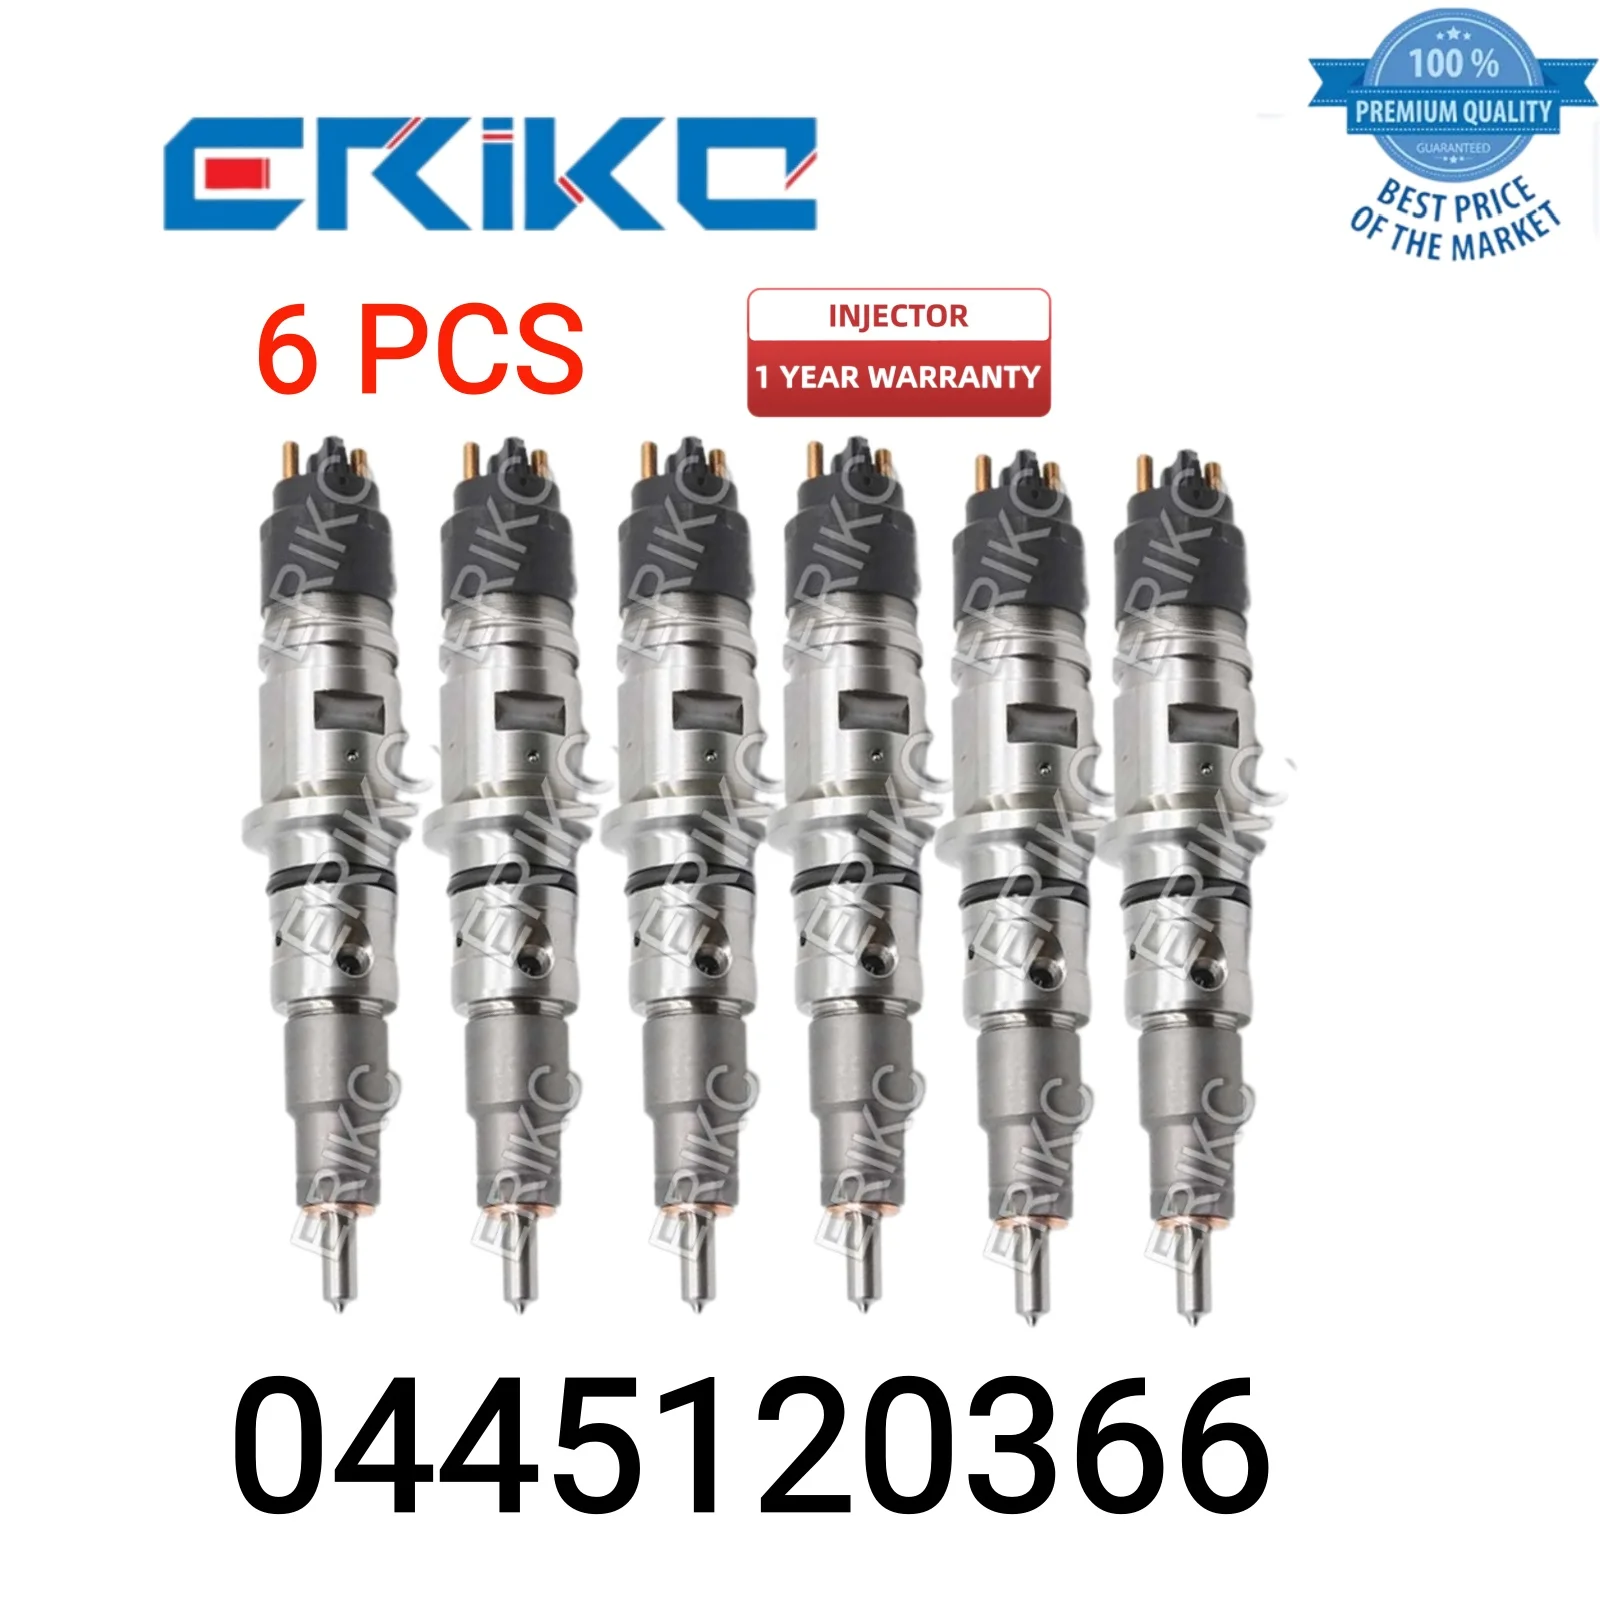 

6 PCS 0445120366 Engine Oil Injector 0 445 120 366 Auto Common Rail Injector 0445 120 366 Nozzle Injector fit for CUMMINS